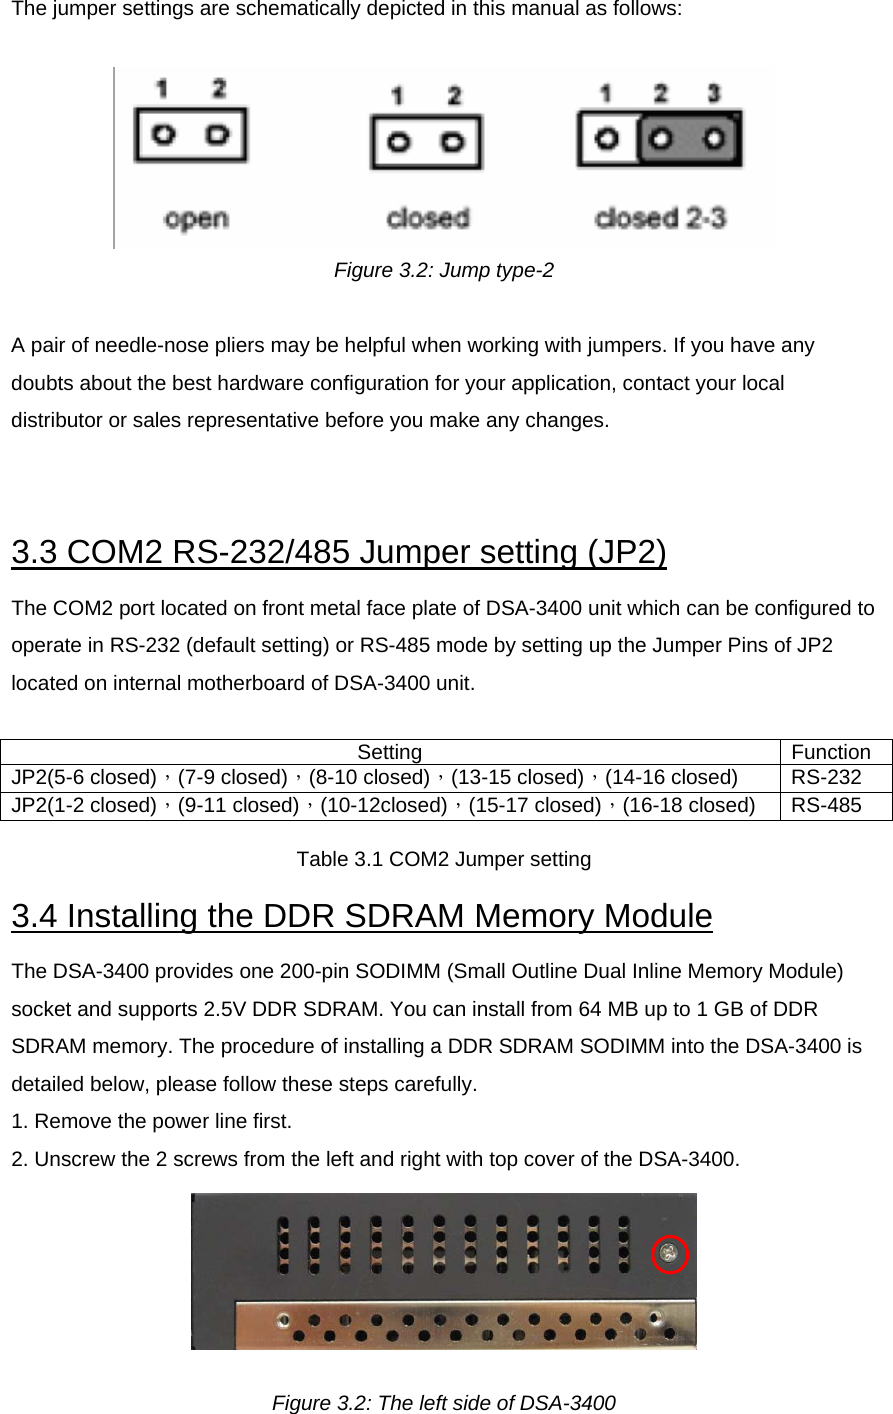 The jumper settings are schematically depicted in this manual as follows:    Figure 3.2: Jump type-2  A pair of needle-nose pliers may be helpful when working with jumpers. If you have any doubts about the best hardware configuration for your application, contact your local distributor or sales representative before you make any changes.    3.3 COM2 RS-232/485 Jumper setting (JP2)  The COM2 port located on front metal face plate of DSA-3400 unit which can be configured to operate in RS-232 (default setting) or RS-485 mode by setting up the Jumper Pins of JP2 located on internal motherboard of DSA-3400 unit.   Setting Function JP2(5-6 closed)，(7-9 closed)，(8-10 closed)，(13-15 closed)，(14-16 closed)  RS-232 JP2(1-2 closed)，(9-11 closed)，(10-12closed)，(15-17 closed)，(16-18 closed)  RS-485 Table 3.1 COM2 Jumper setting 3.4 Installing the DDR SDRAM Memory Module  The DSA-3400 provides one 200-pin SODIMM (Small Outline Dual Inline Memory Module) socket and supports 2.5V DDR SDRAM. You can install from 64 MB up to 1 GB of DDR SDRAM memory. The procedure of installing a DDR SDRAM SODIMM into the DSA-3400 is detailed below, please follow these steps carefully.  1. Remove the power line first.  2. Unscrew the 2 screws from the left and right with top cover of the DSA-3400.   Figure 3.2: The left side of DSA-3400 